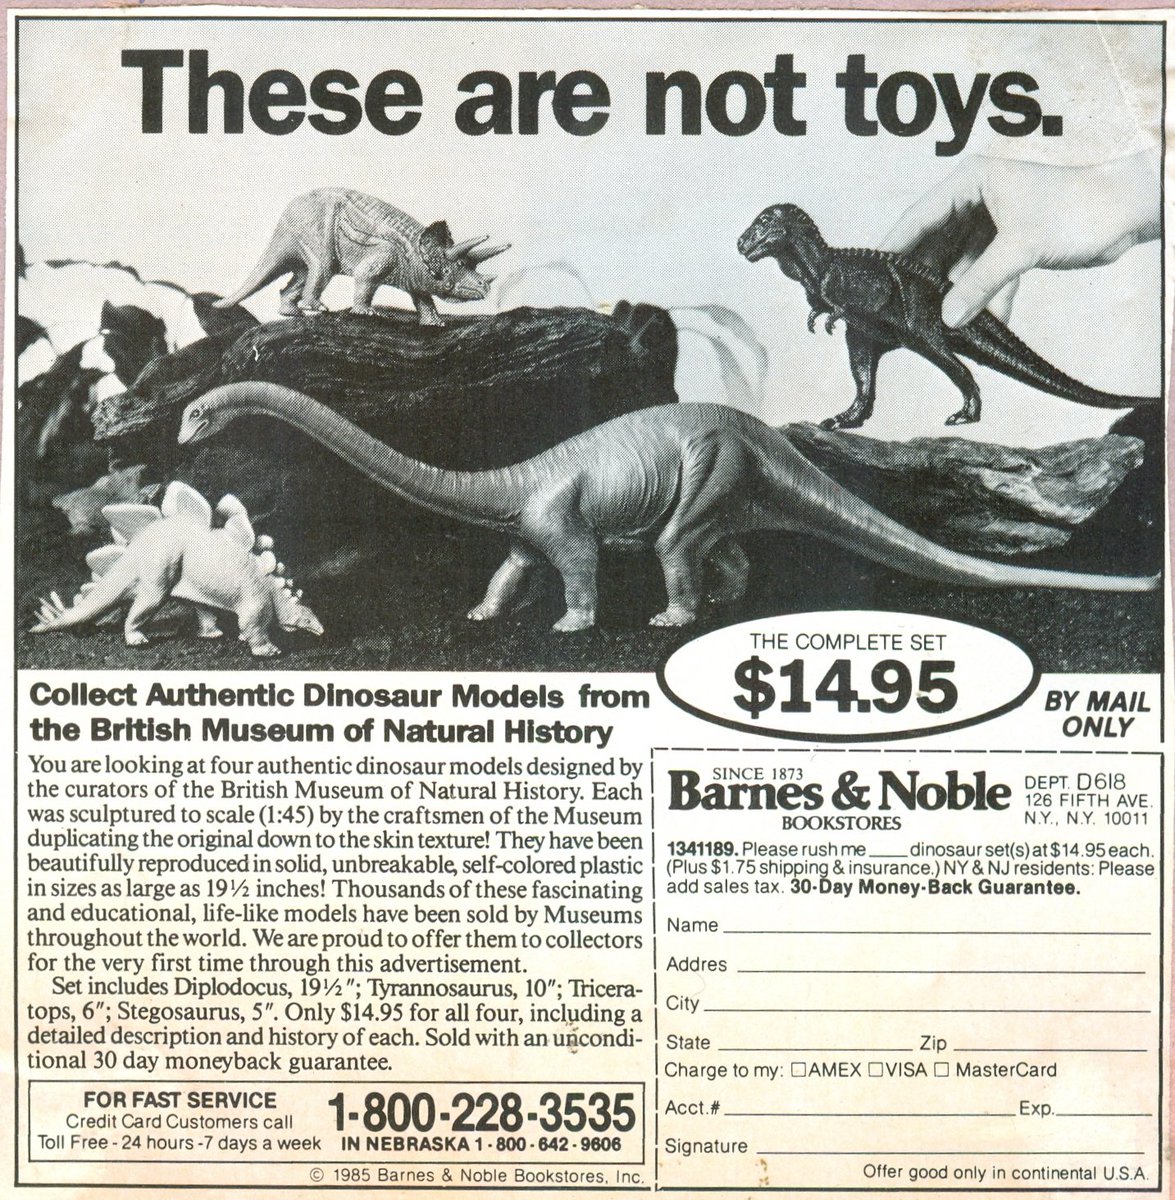 Now it's important to realise that these toys aren't a UK phenomenon. The Invicta plastic toys were so popular, museums and toy shops around the world started selling them. It's not an exaggeration to say that these toys revolutionised how kids interacted with prehistoric animals